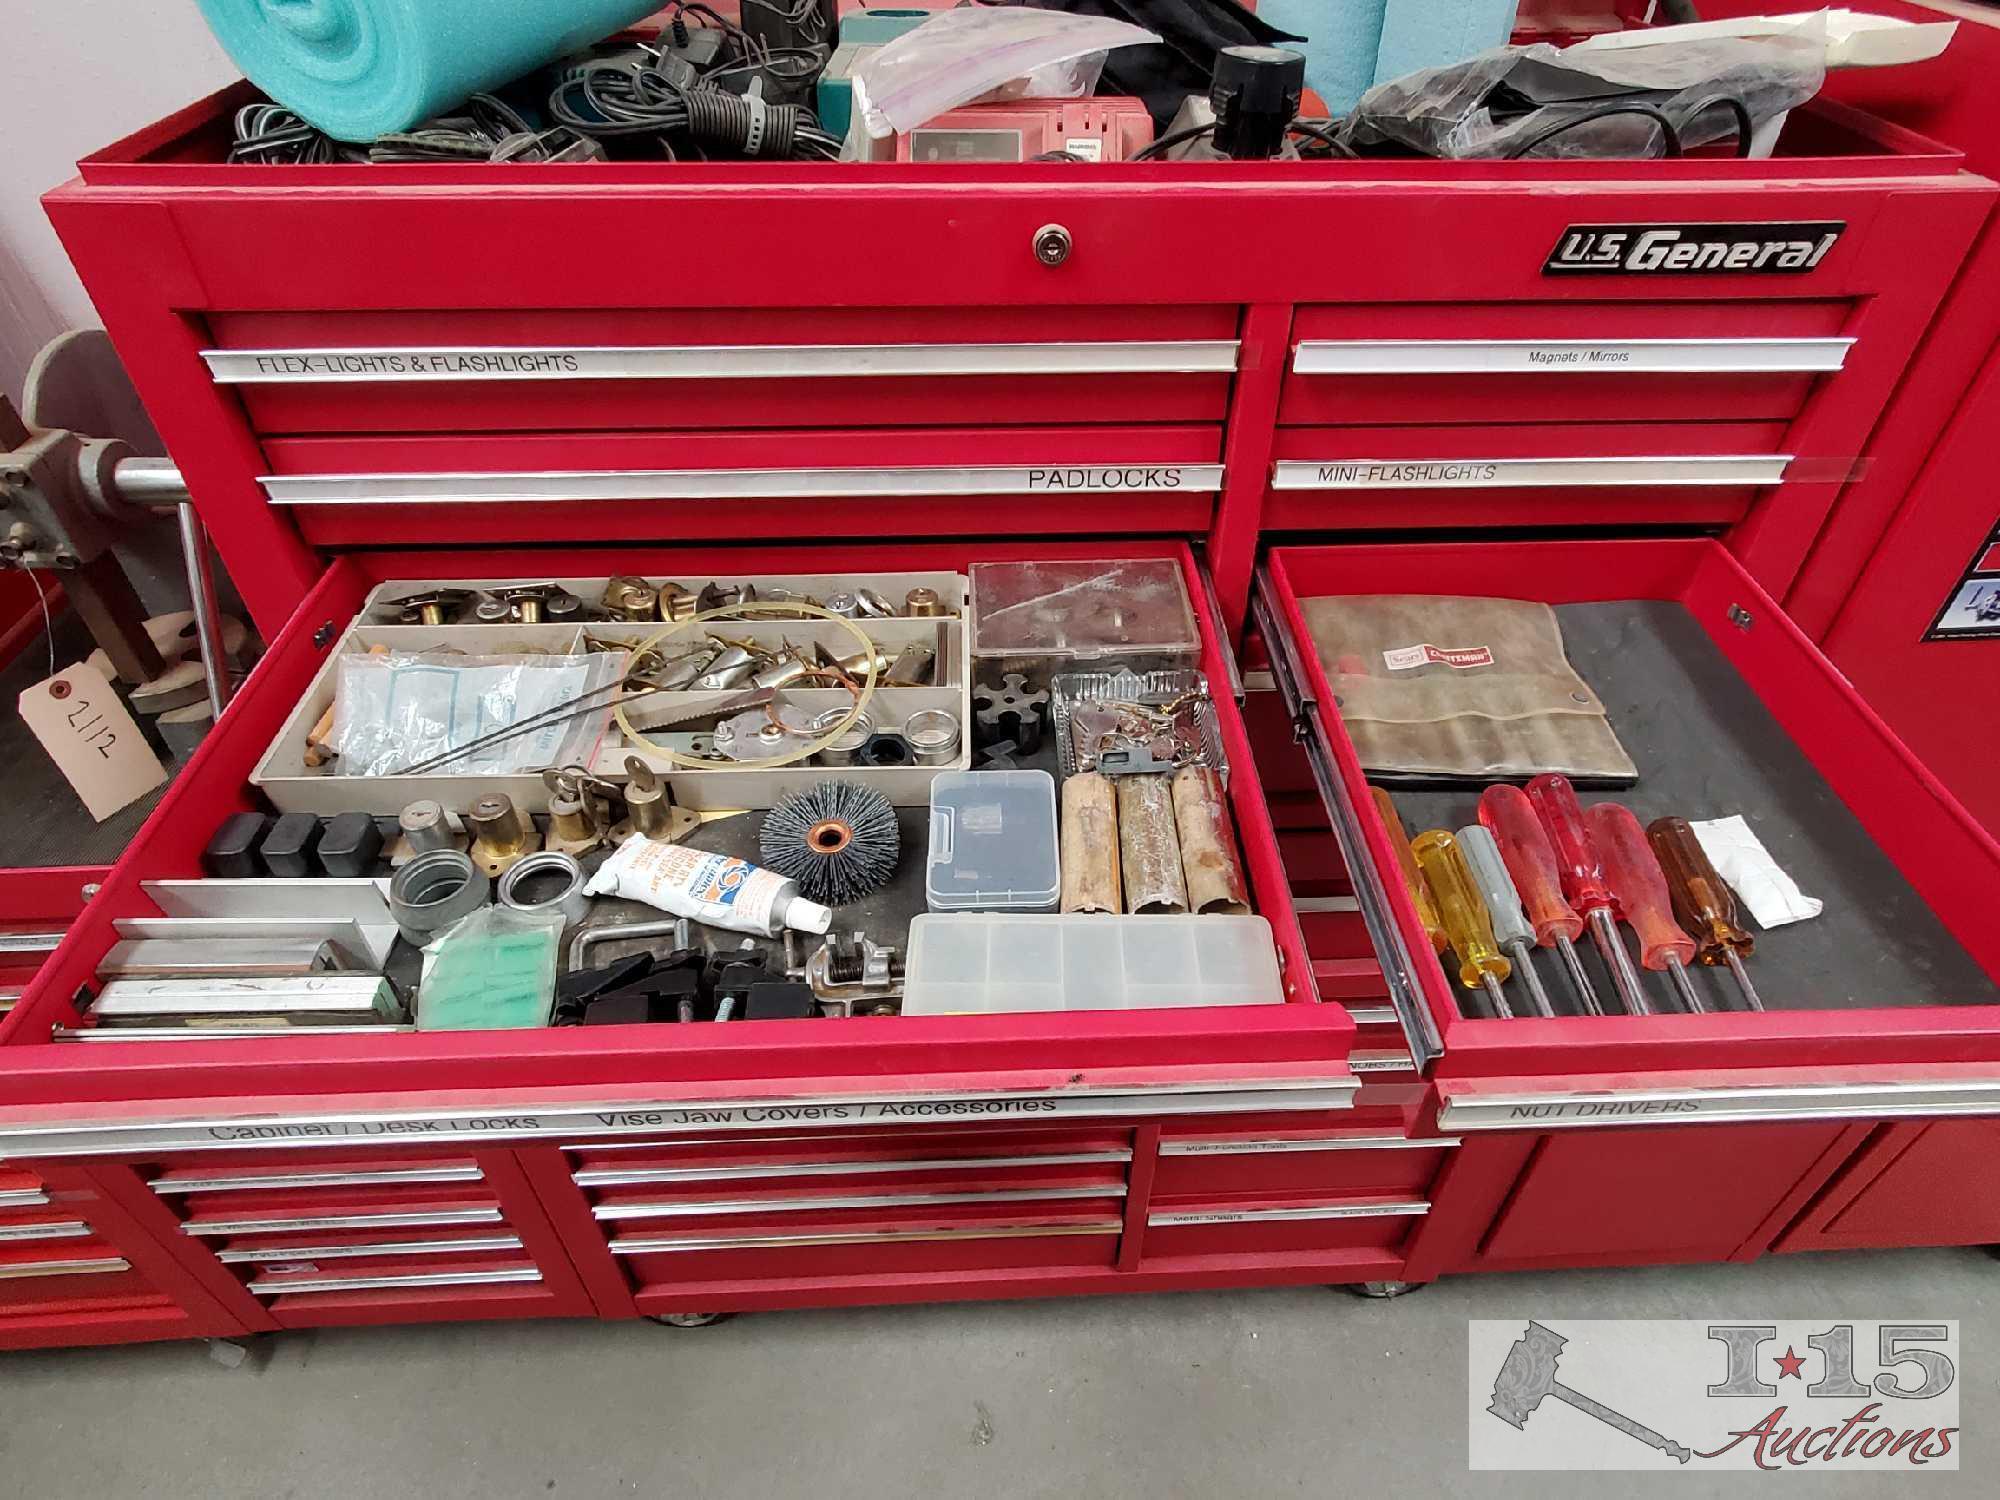 U.S. General 42" Tool Box, Top Box, Side Cabinet, And Side Drawers